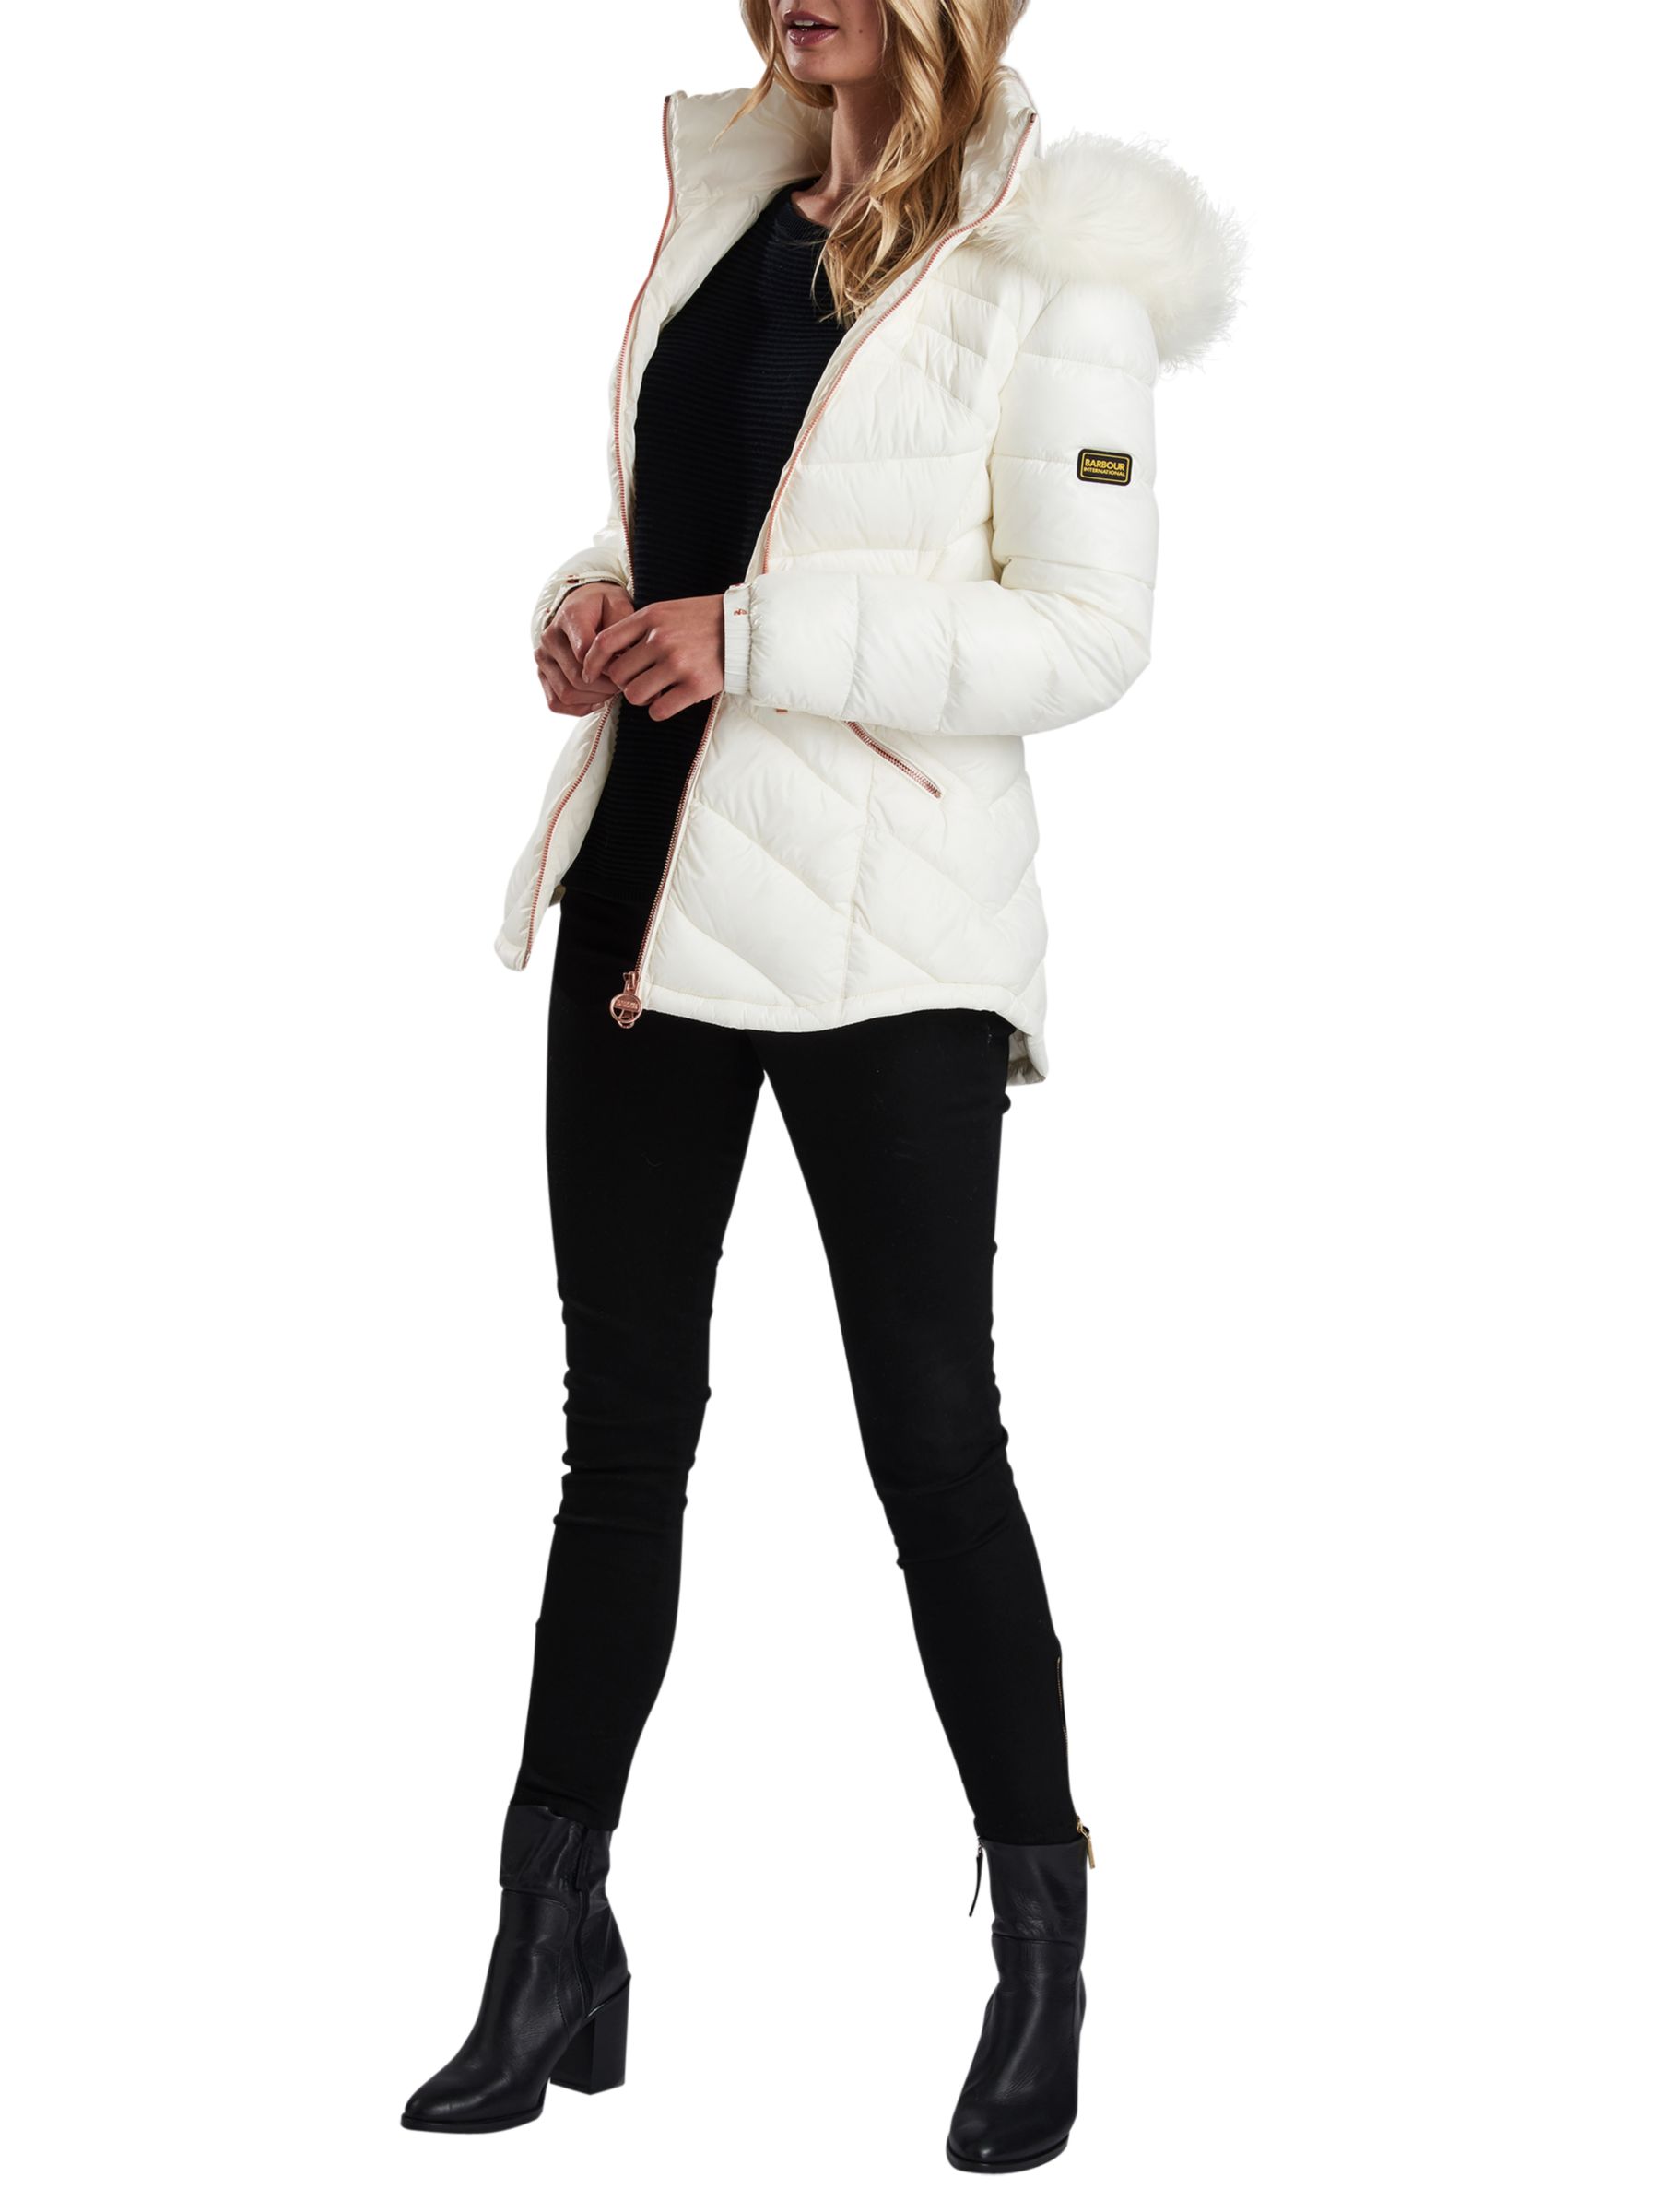 barbour white quilted jacket